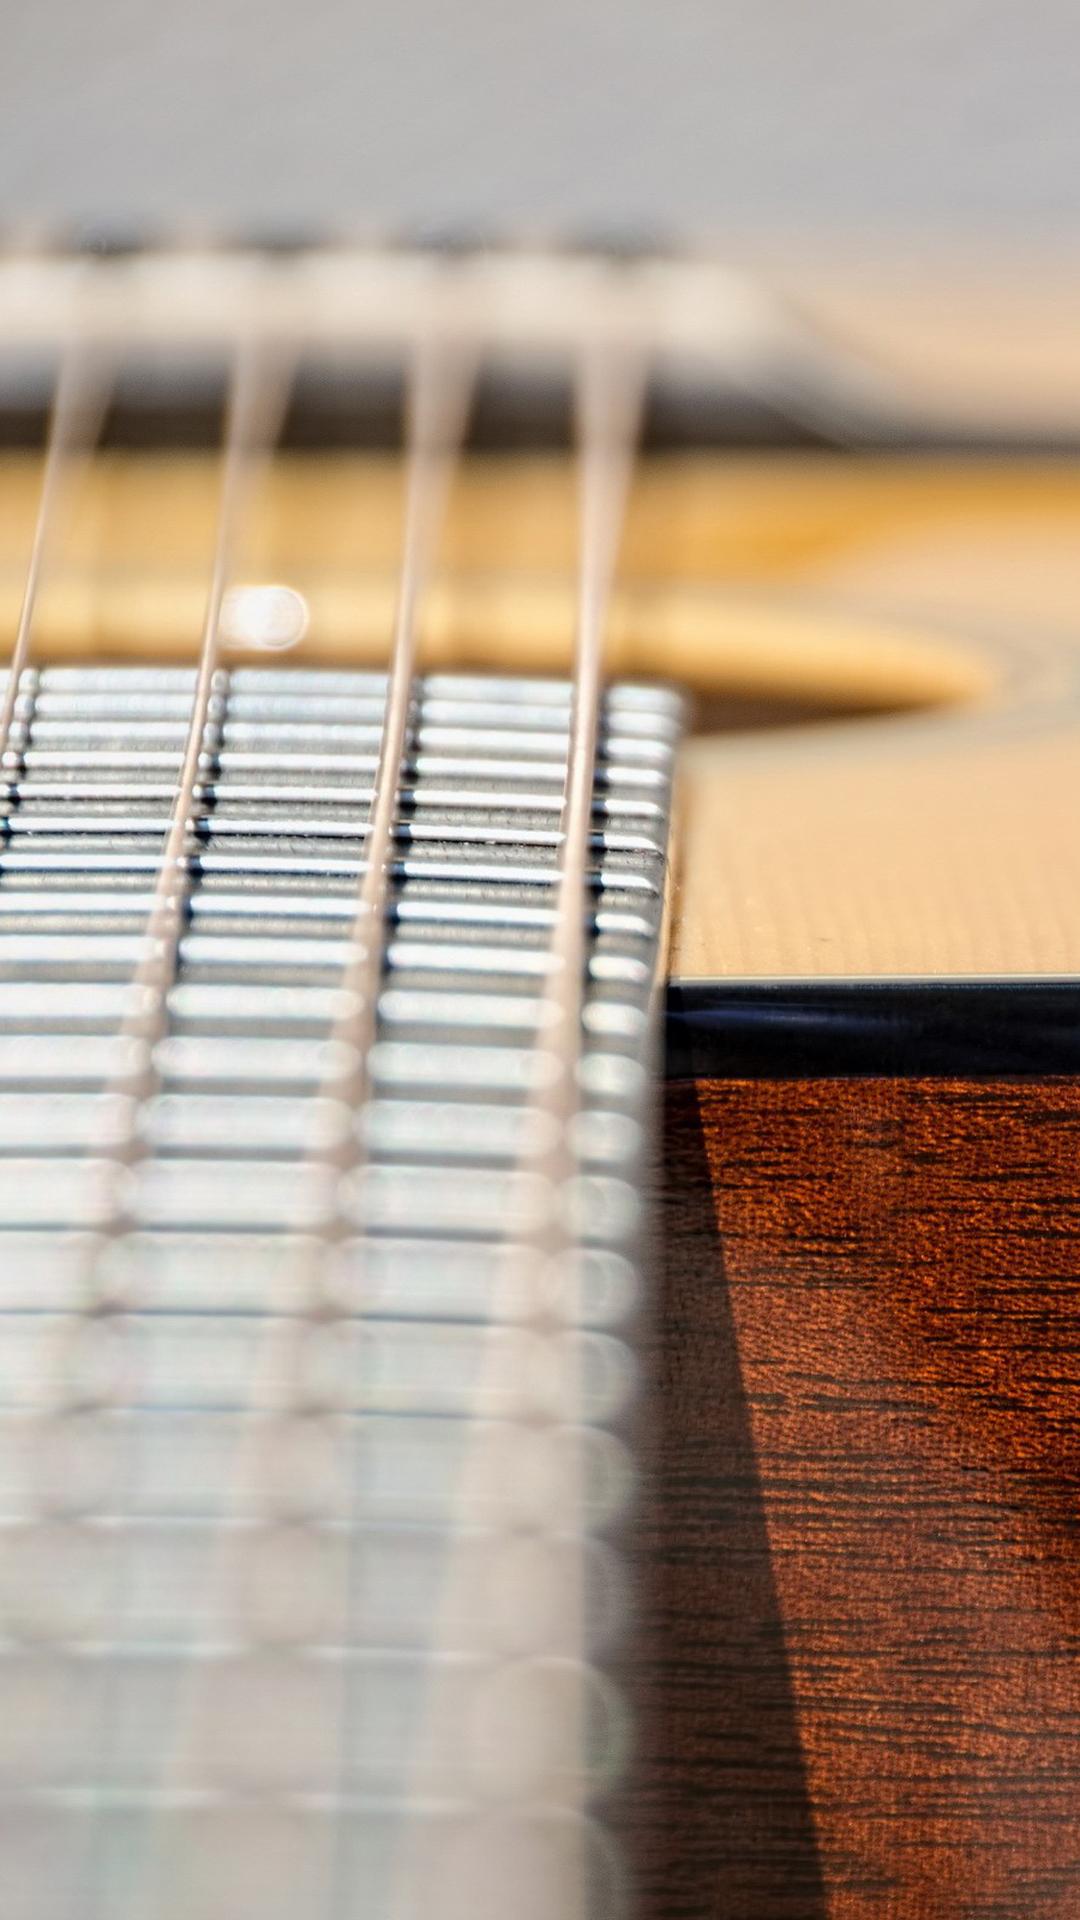 Guitar Strings Detail Close Up Android Wallpaper Free Download